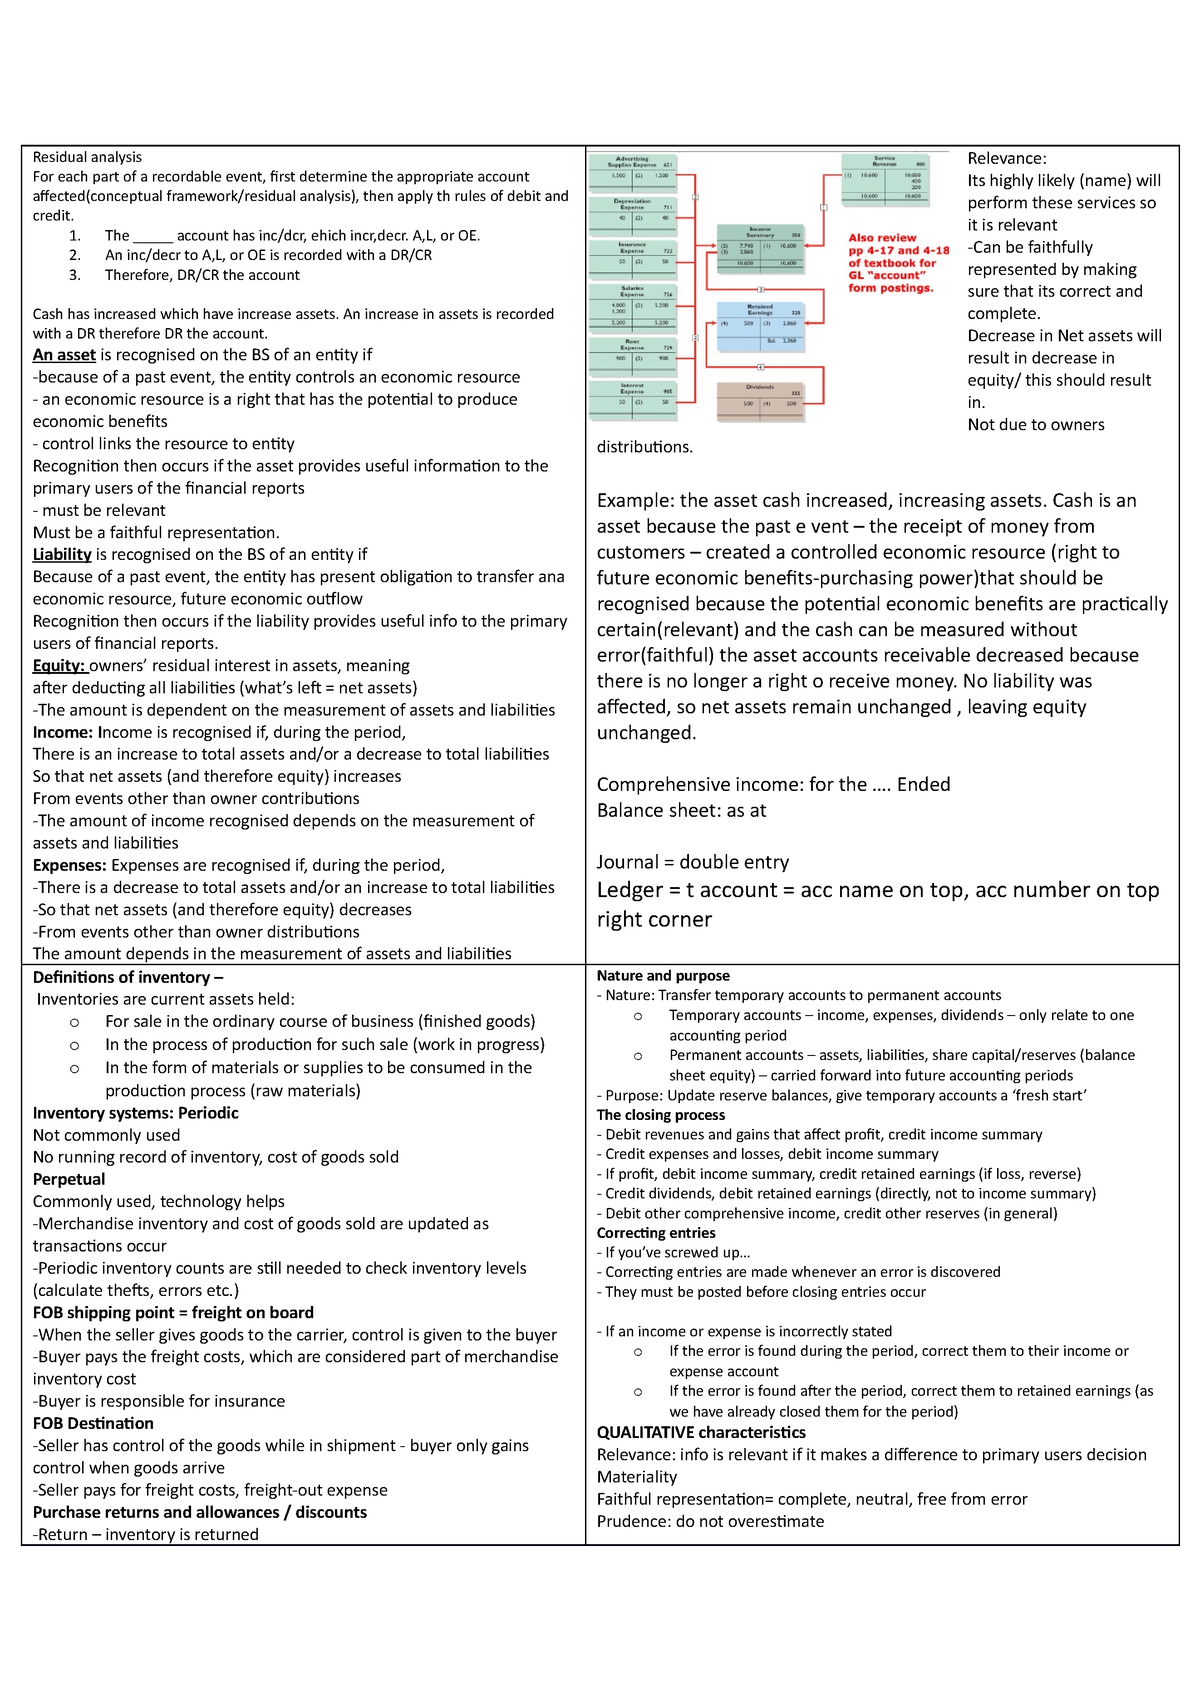 Acctng 102 cheat sheet - Notes - Residual analysis For each part of a ...